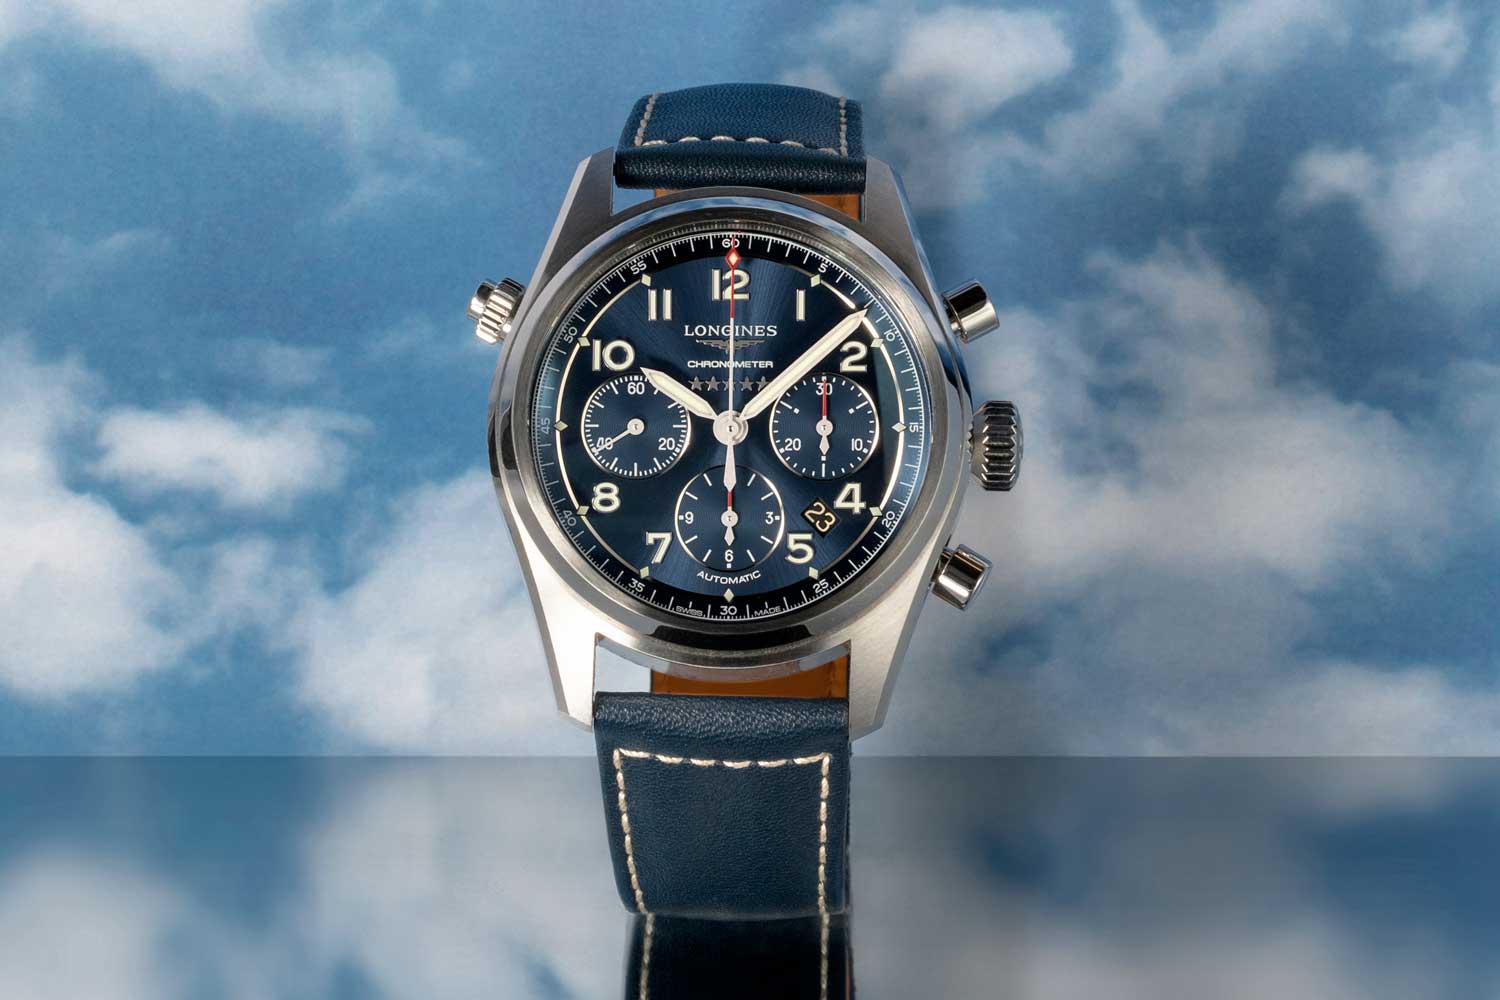 The chronograph addition to the Spirit collection is a 42mm satin and polished stainless steel timepiece; houses a COSC-certified column-wheel chronograph movement (L688.4) with silicon hairspring; a domed sapphire glass protects a sunray blue dial set with Arabic numerals and silvered sandblasted hands coated with Super-LumiNova®; The finishing touch to this exceptional watch is the blue leather strap that complements the case and dial (©Revolution)